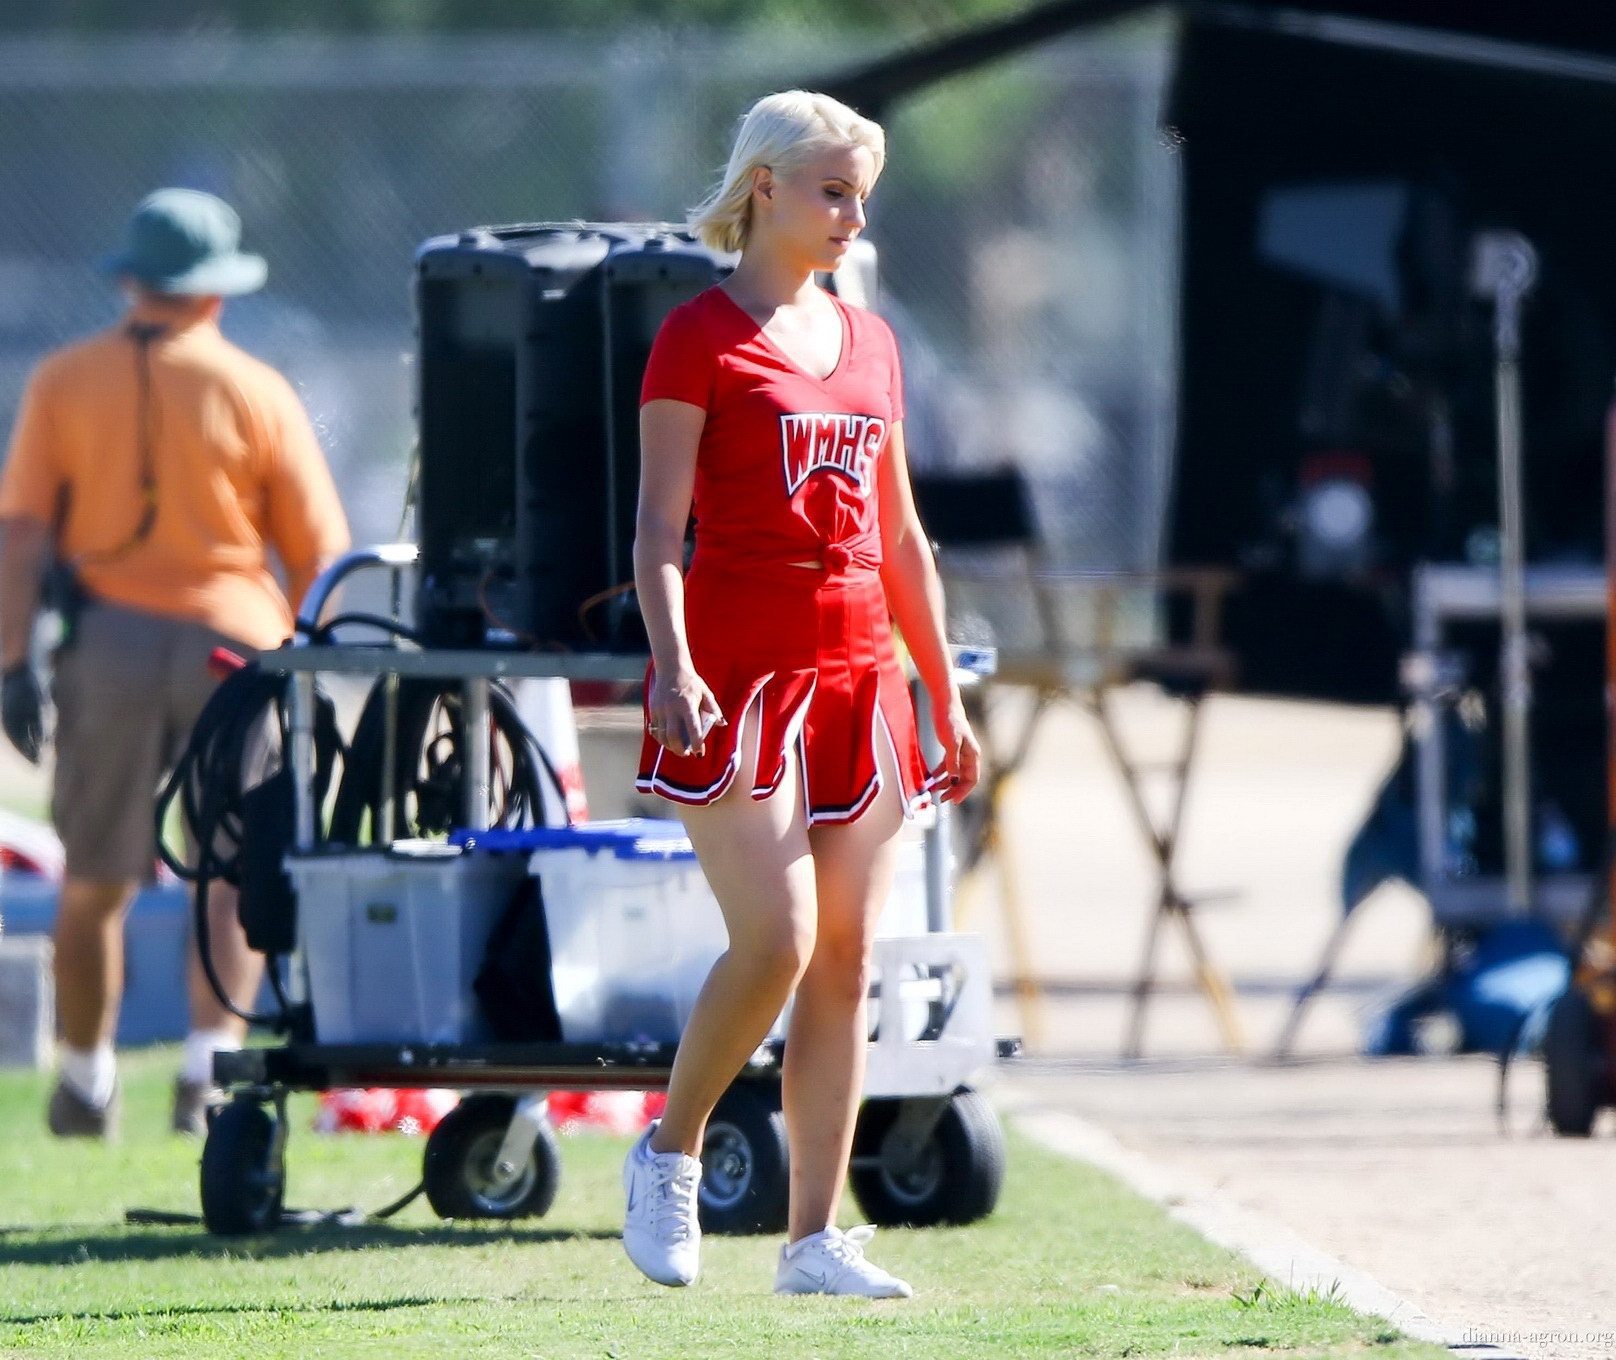 Dianna Agron in cheerleader outfit flashing her red panties on Glee season 6 set #75185185